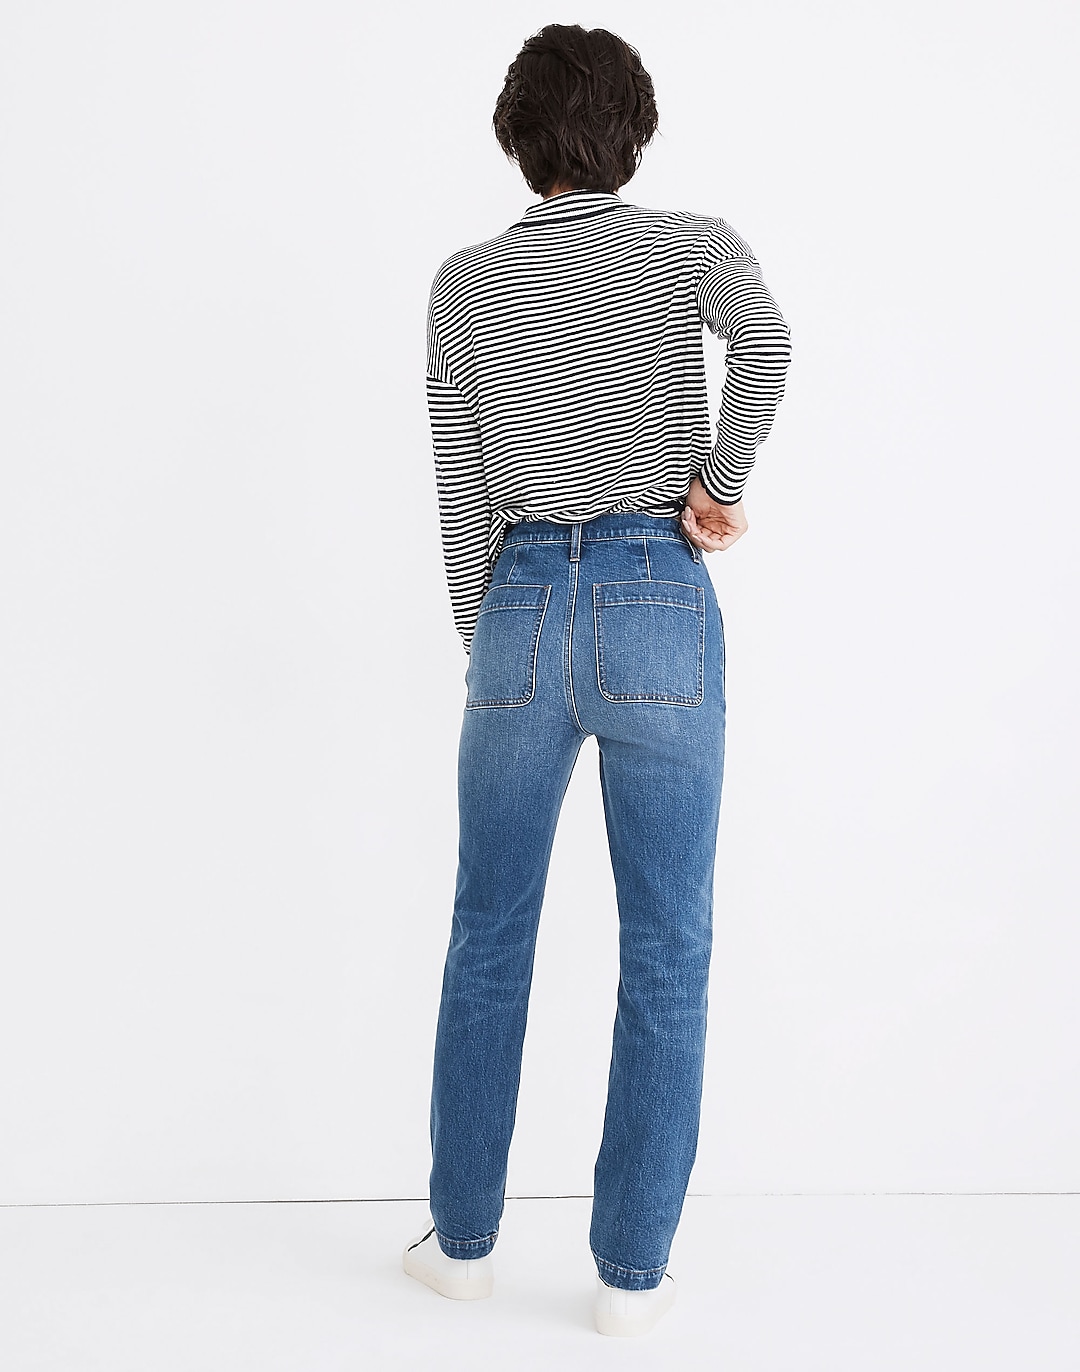 Classic Straight Full-Length Jeans in Marfield Wash: Surplus Pocket Edition